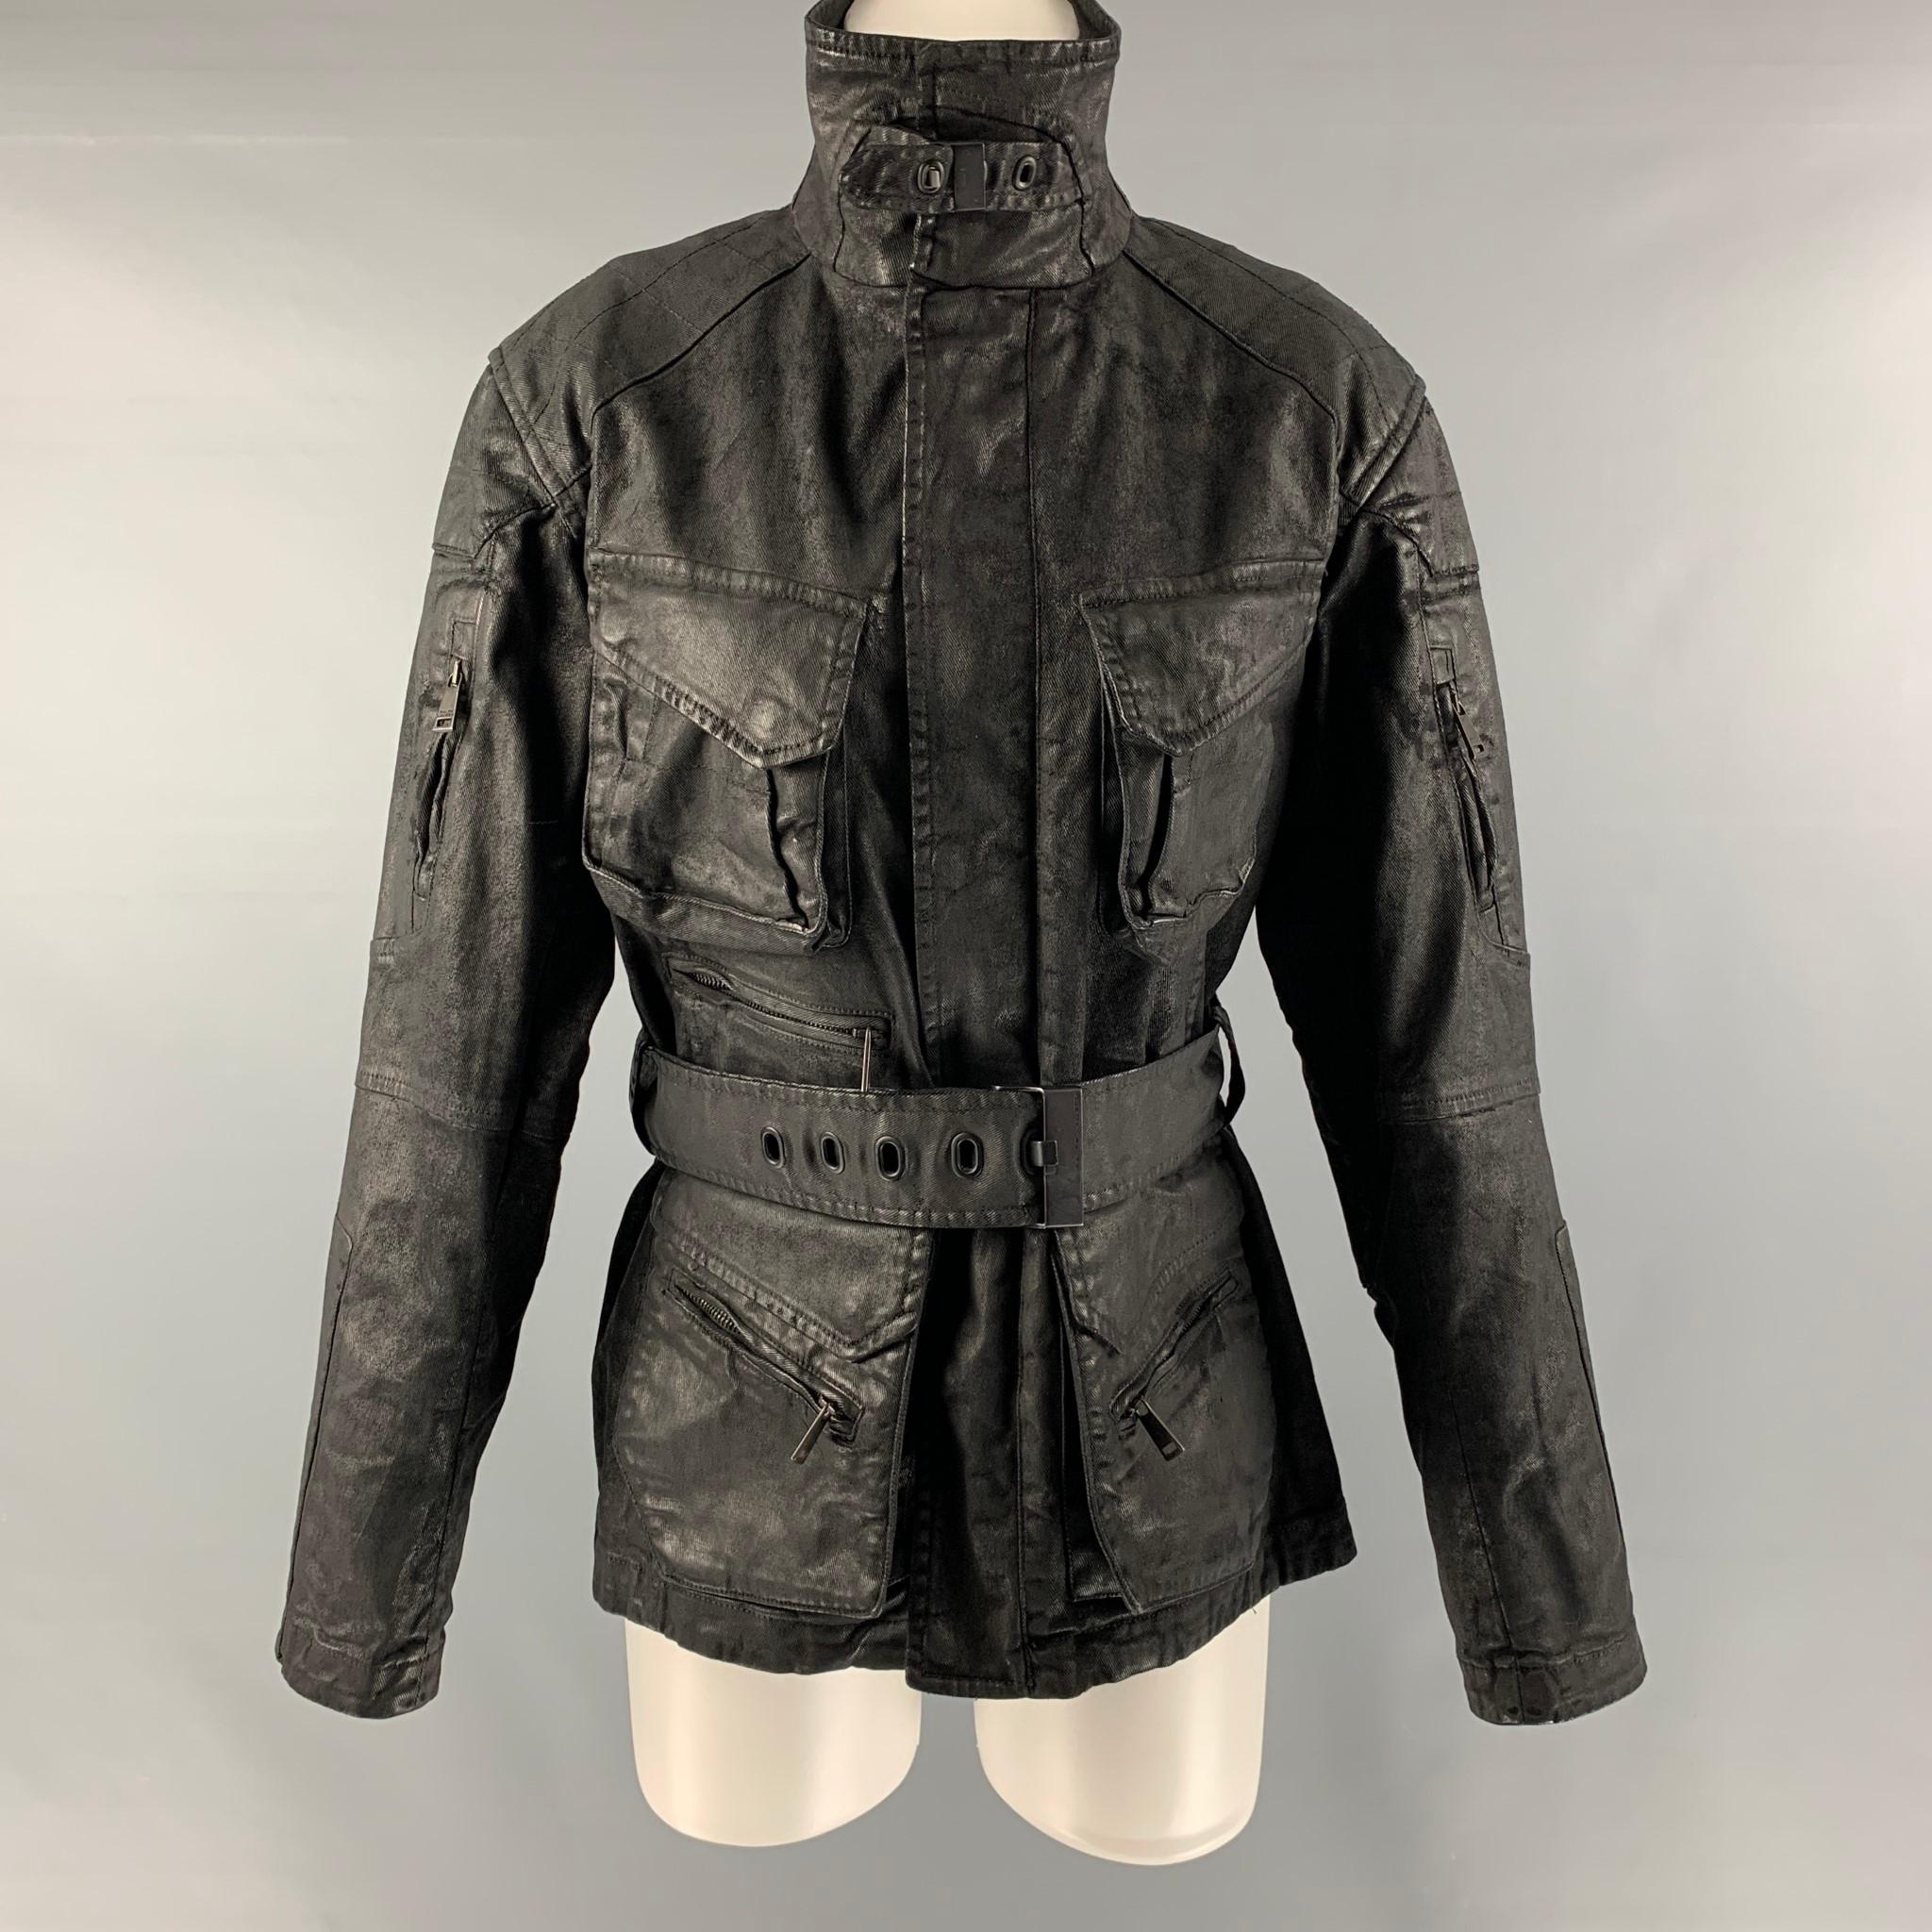 RALPH LAUREN 'BLACK LABEL by' motorcycle jacket comes in a black cotton and elastane coated canvas featuring a high neck, multiple pocket at front, black belt, and zip up closure. Made in Italy.

Excellent Pre-Owned Condition.
Marked: